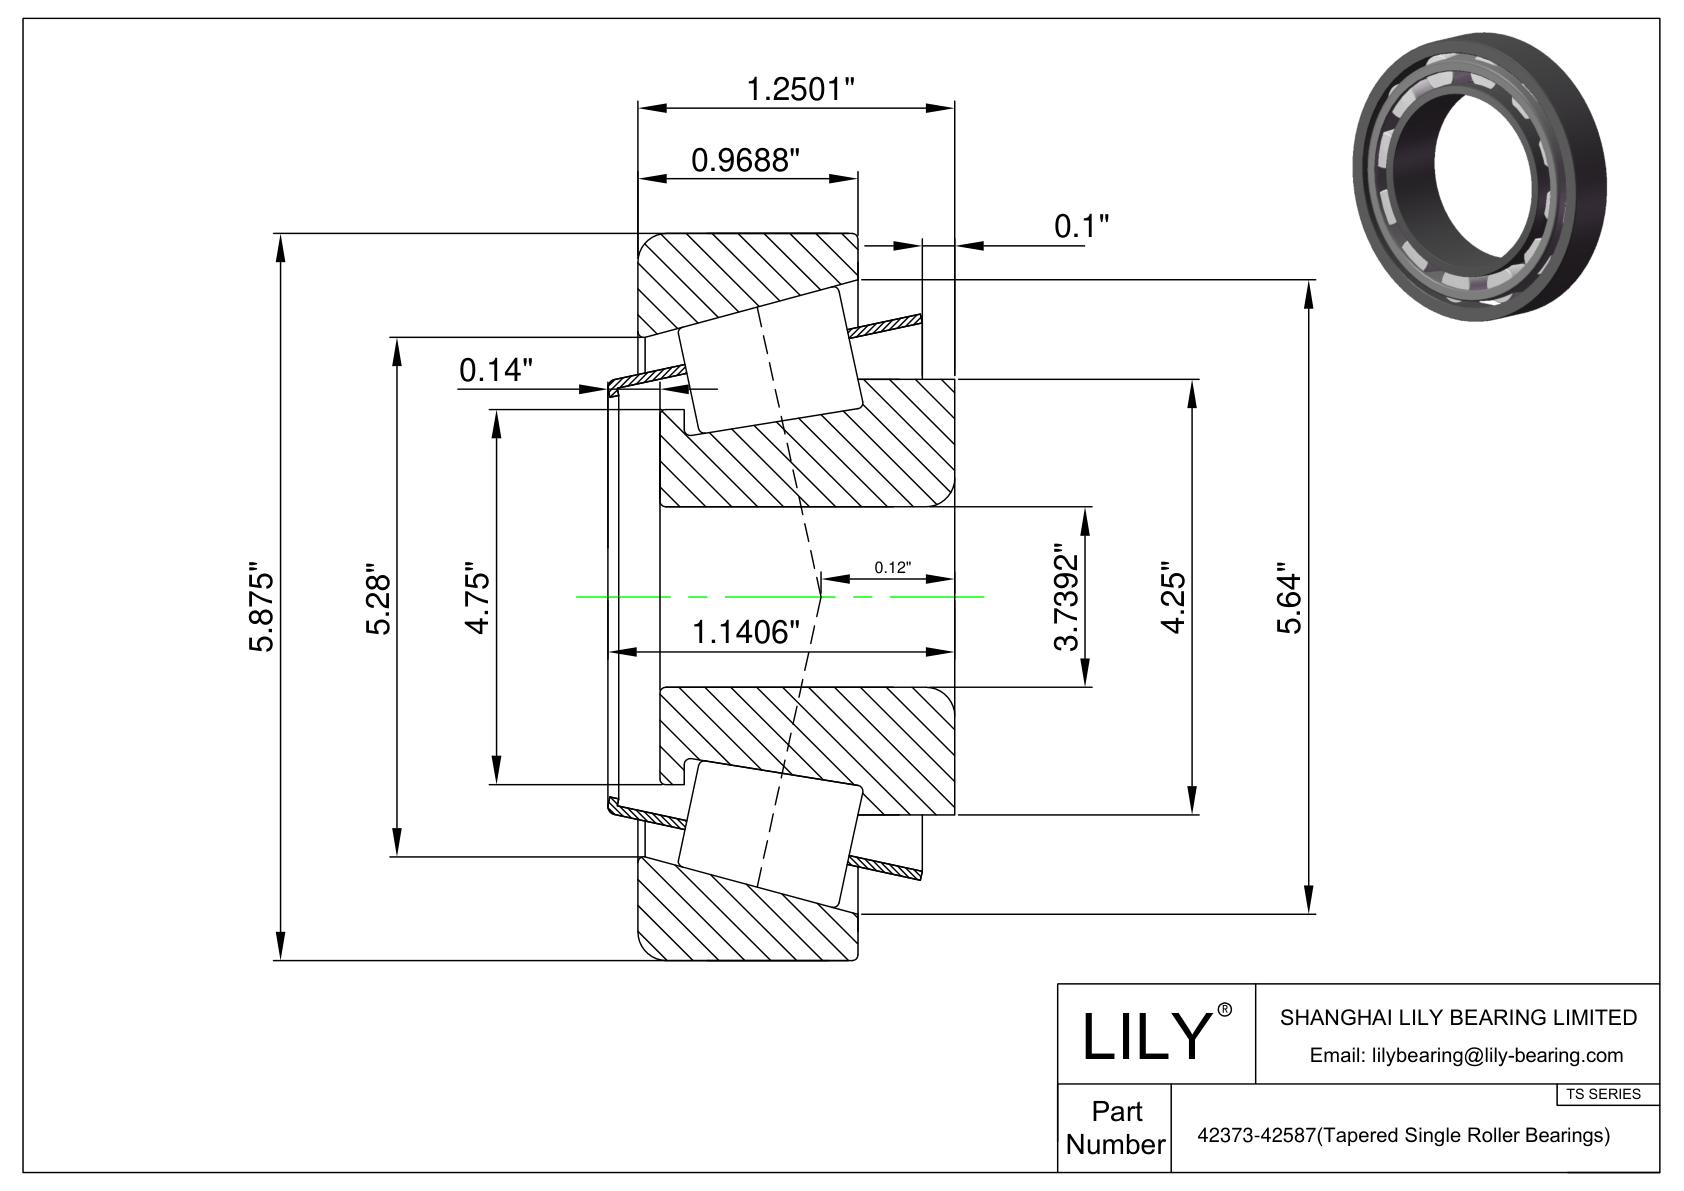 42373-42587 TS (Tapered Single Roller Bearings) (Imperial) cad drawing